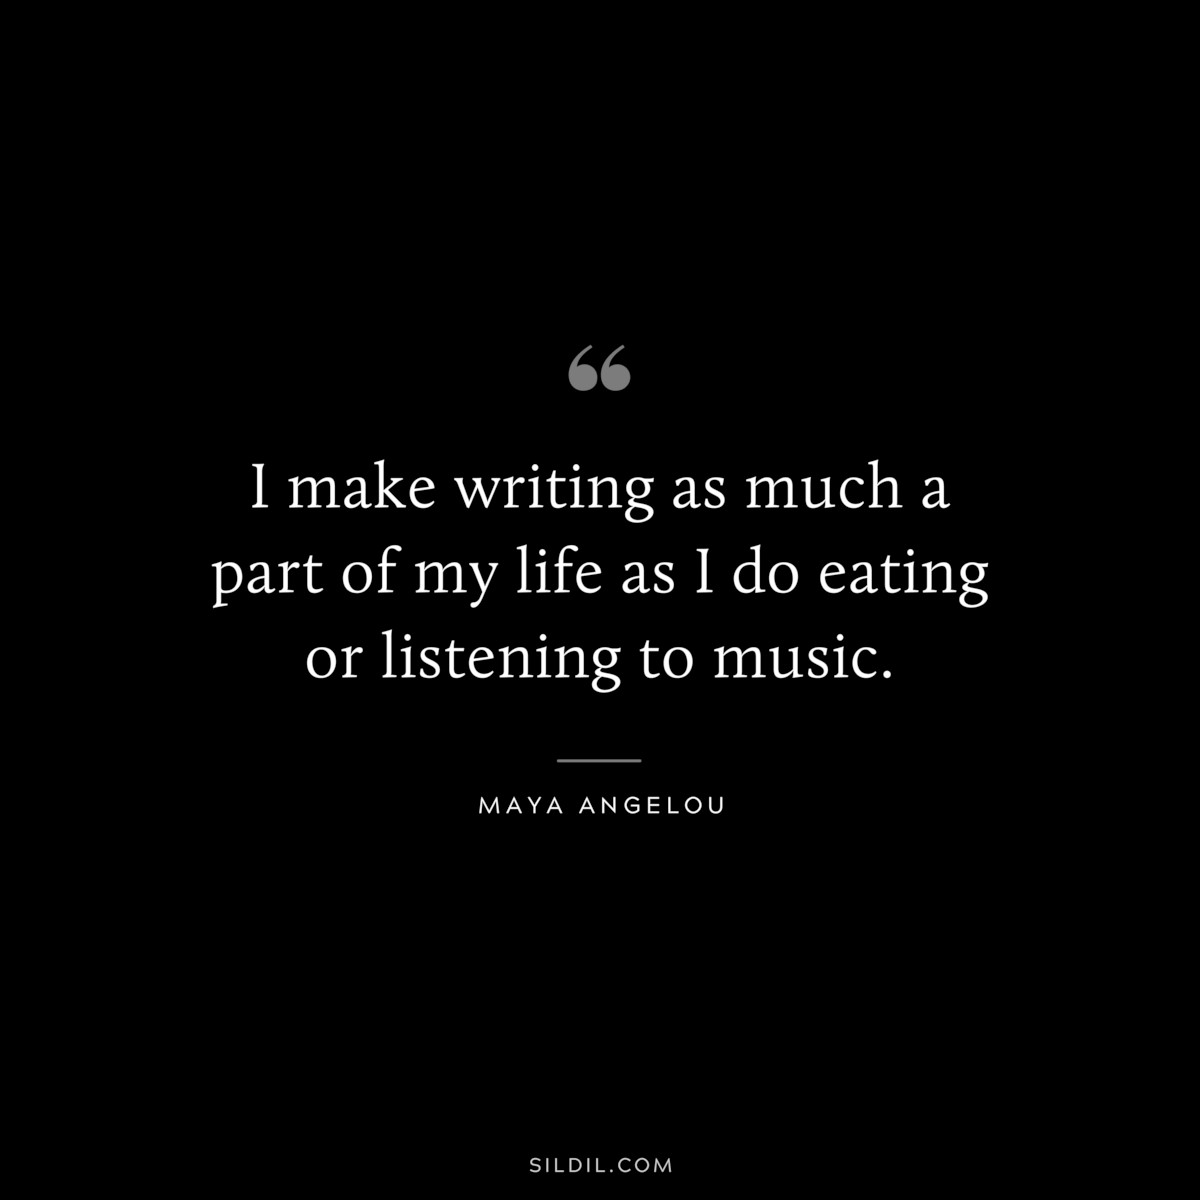 I make writing as much a part of my life as I do eating or listening to music. ― Maya Angelou